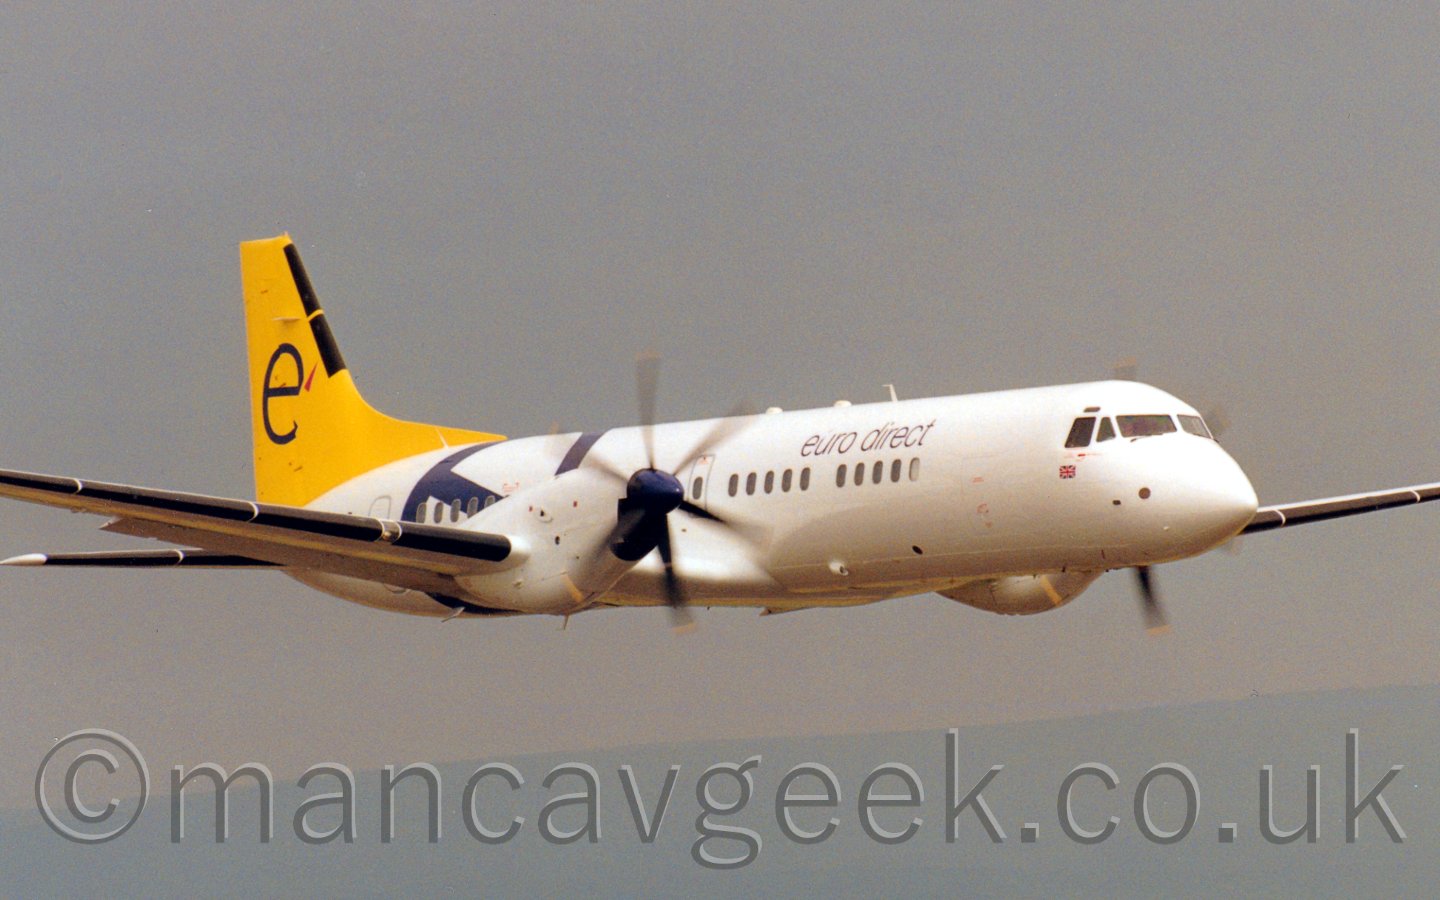 Side view of a twin propellor airliner flying al low level from left to right. The plane is mostly white, with a large blue letter "e" on the rear fuselage, and "euro direct" titles on the upper forward fuselage. The tail is all yellow, with another blue "e" in the middle. Behind, the sky is a dreary grey.